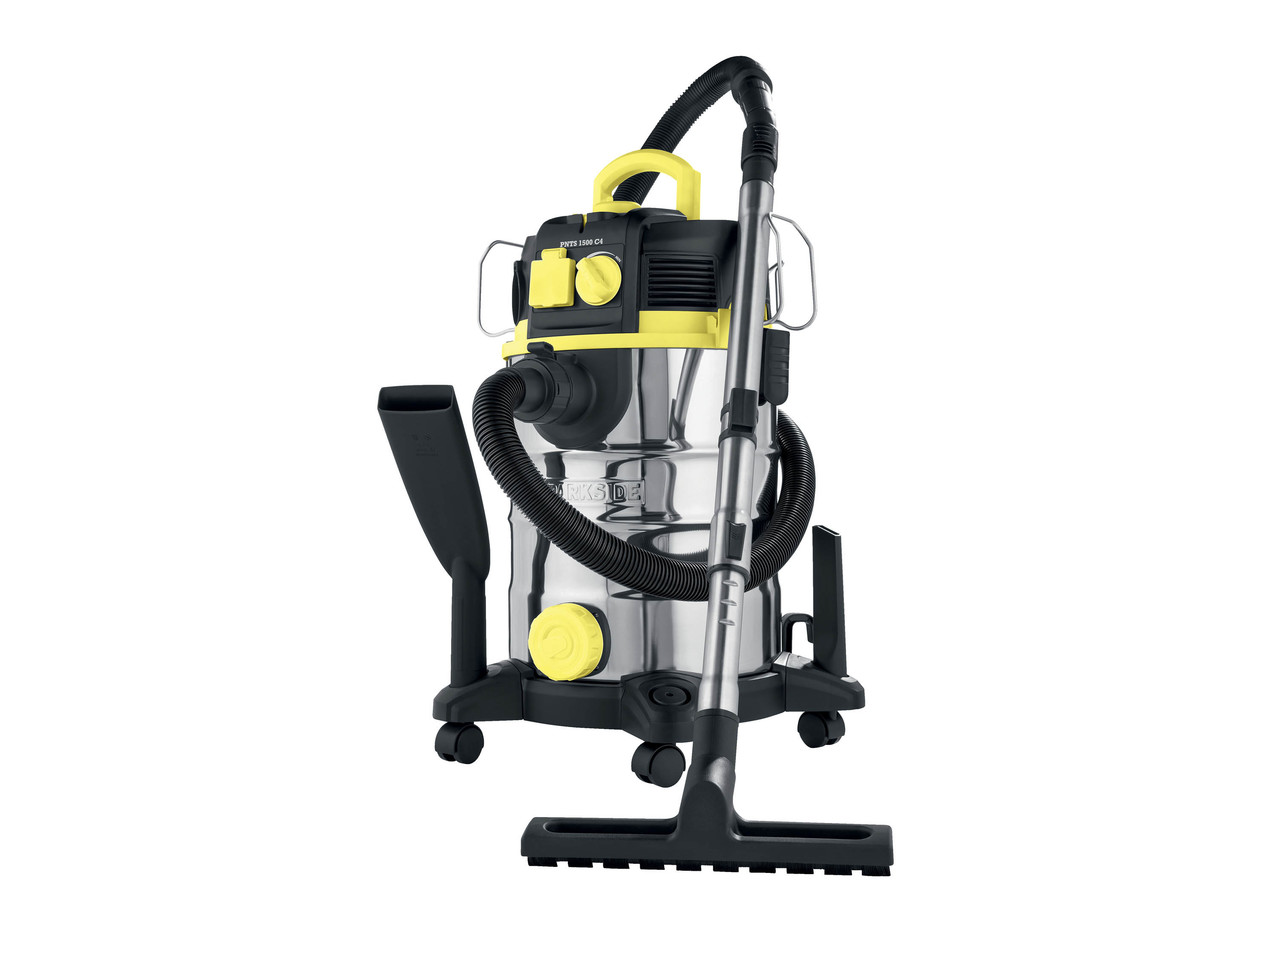 PARKSIDE 1500W Wet and Dry Vacuum Cleaner